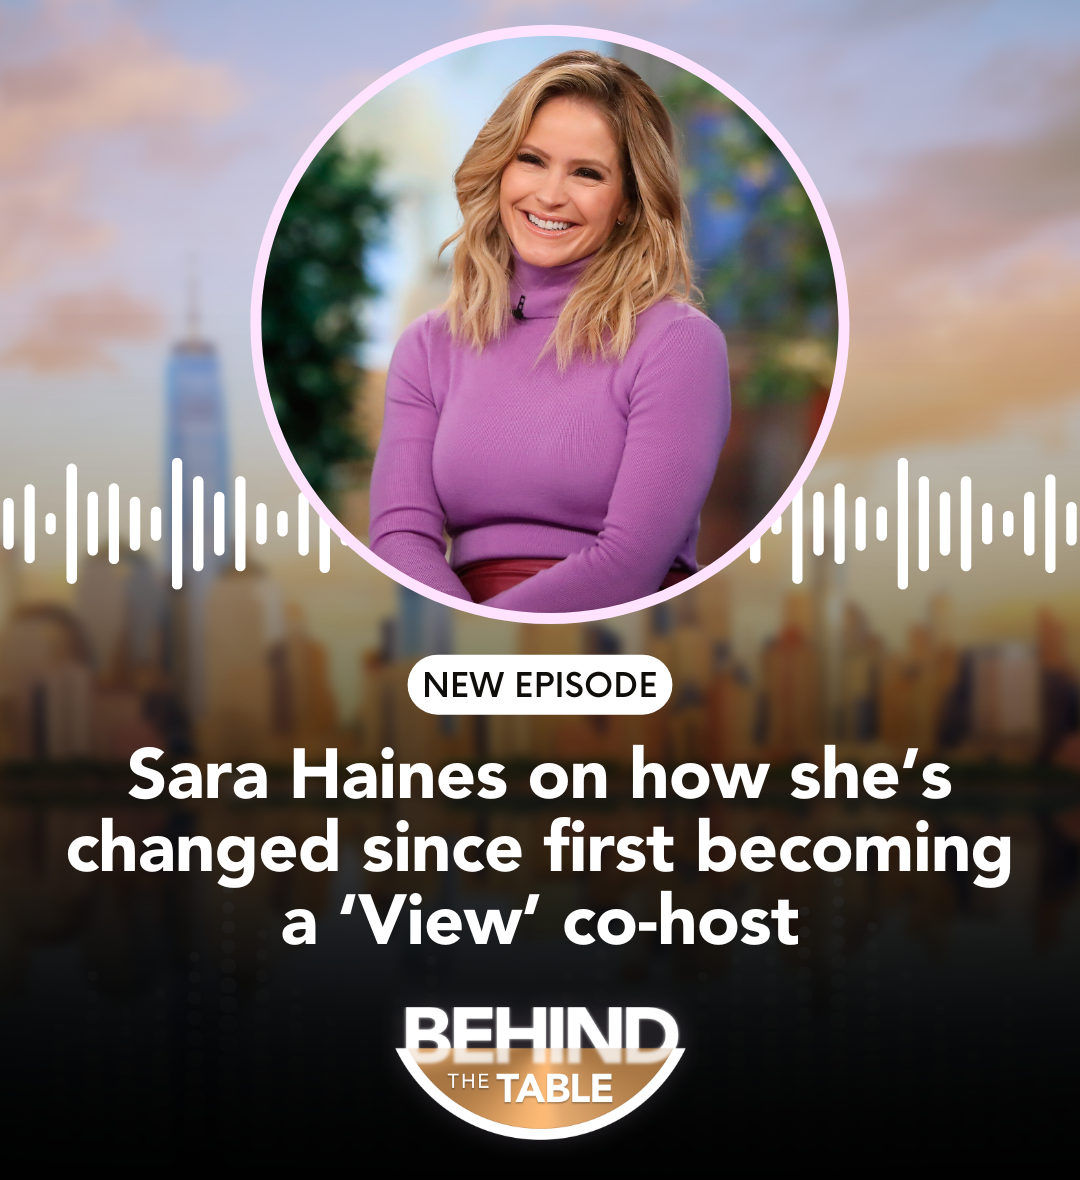 On today's podcast, @sarahaines sits down with @brianteta to catch up after a week off, celebrate the show's six Daytime Emmy nominations, and she answers a listener question about how being a co-host has changed her personal views! Listen now: theviewabc.visitlink.me/Whhb6F